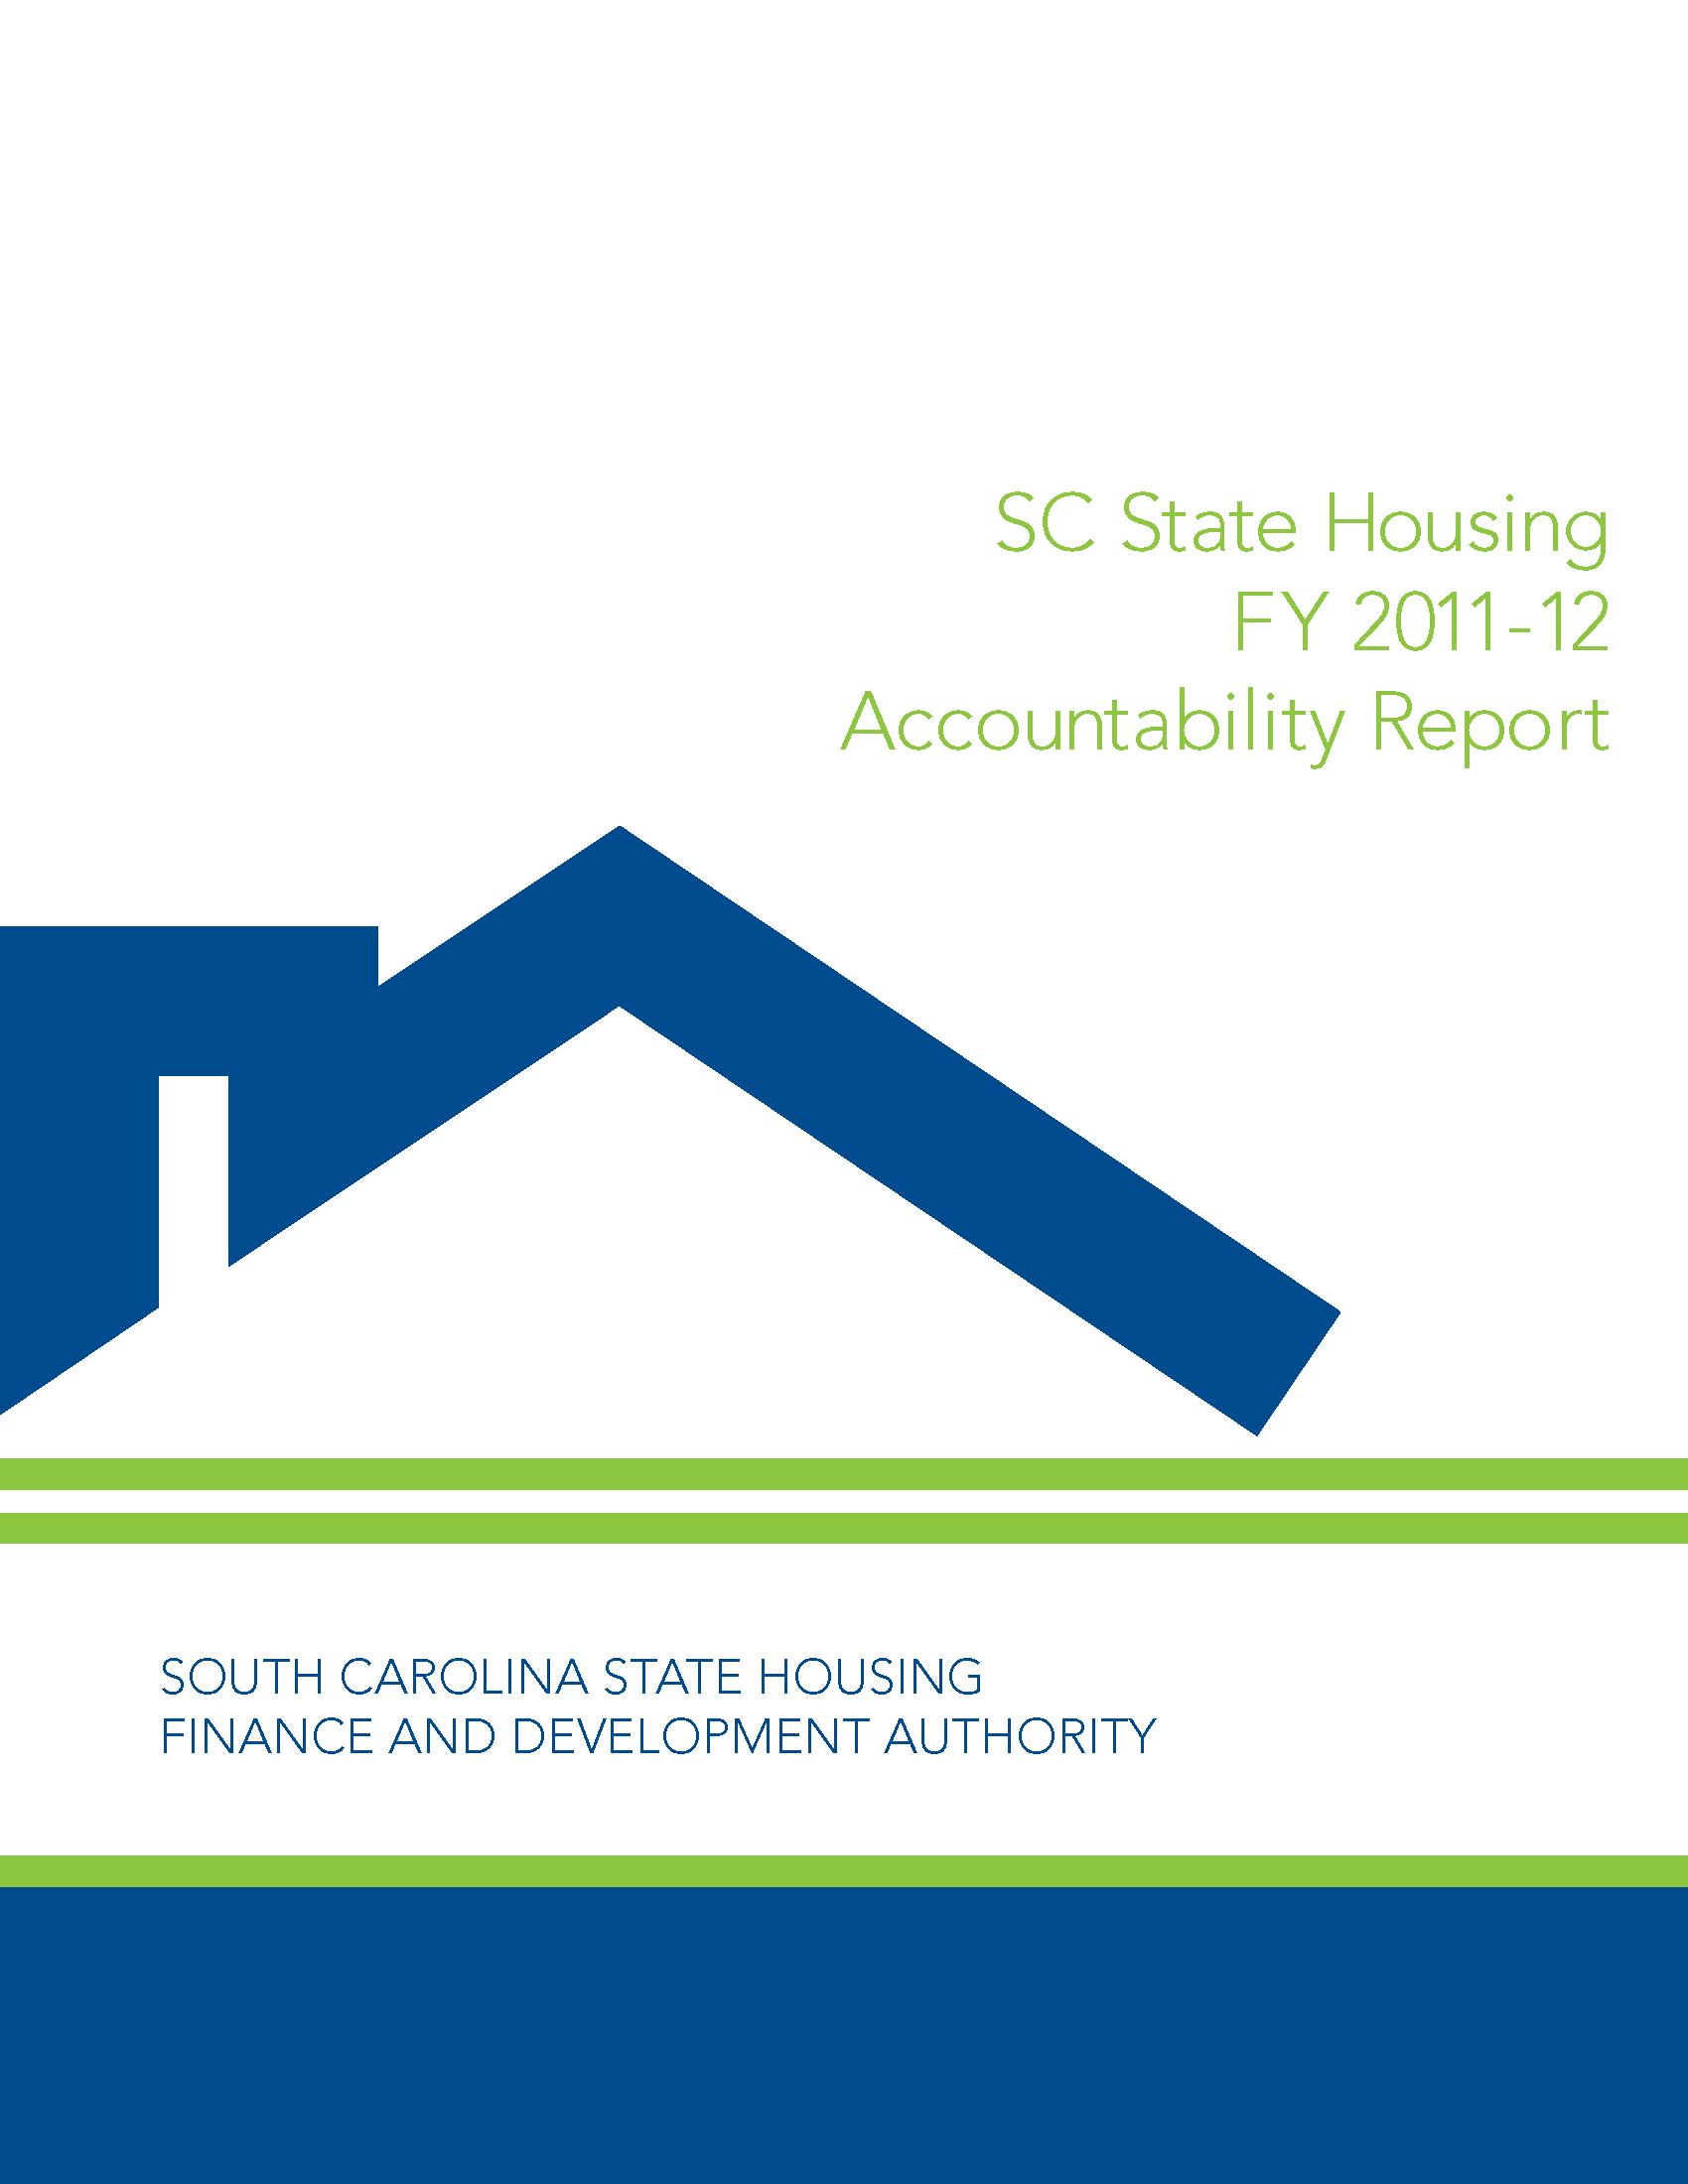 Accountability Report for Fiscal Year 2012